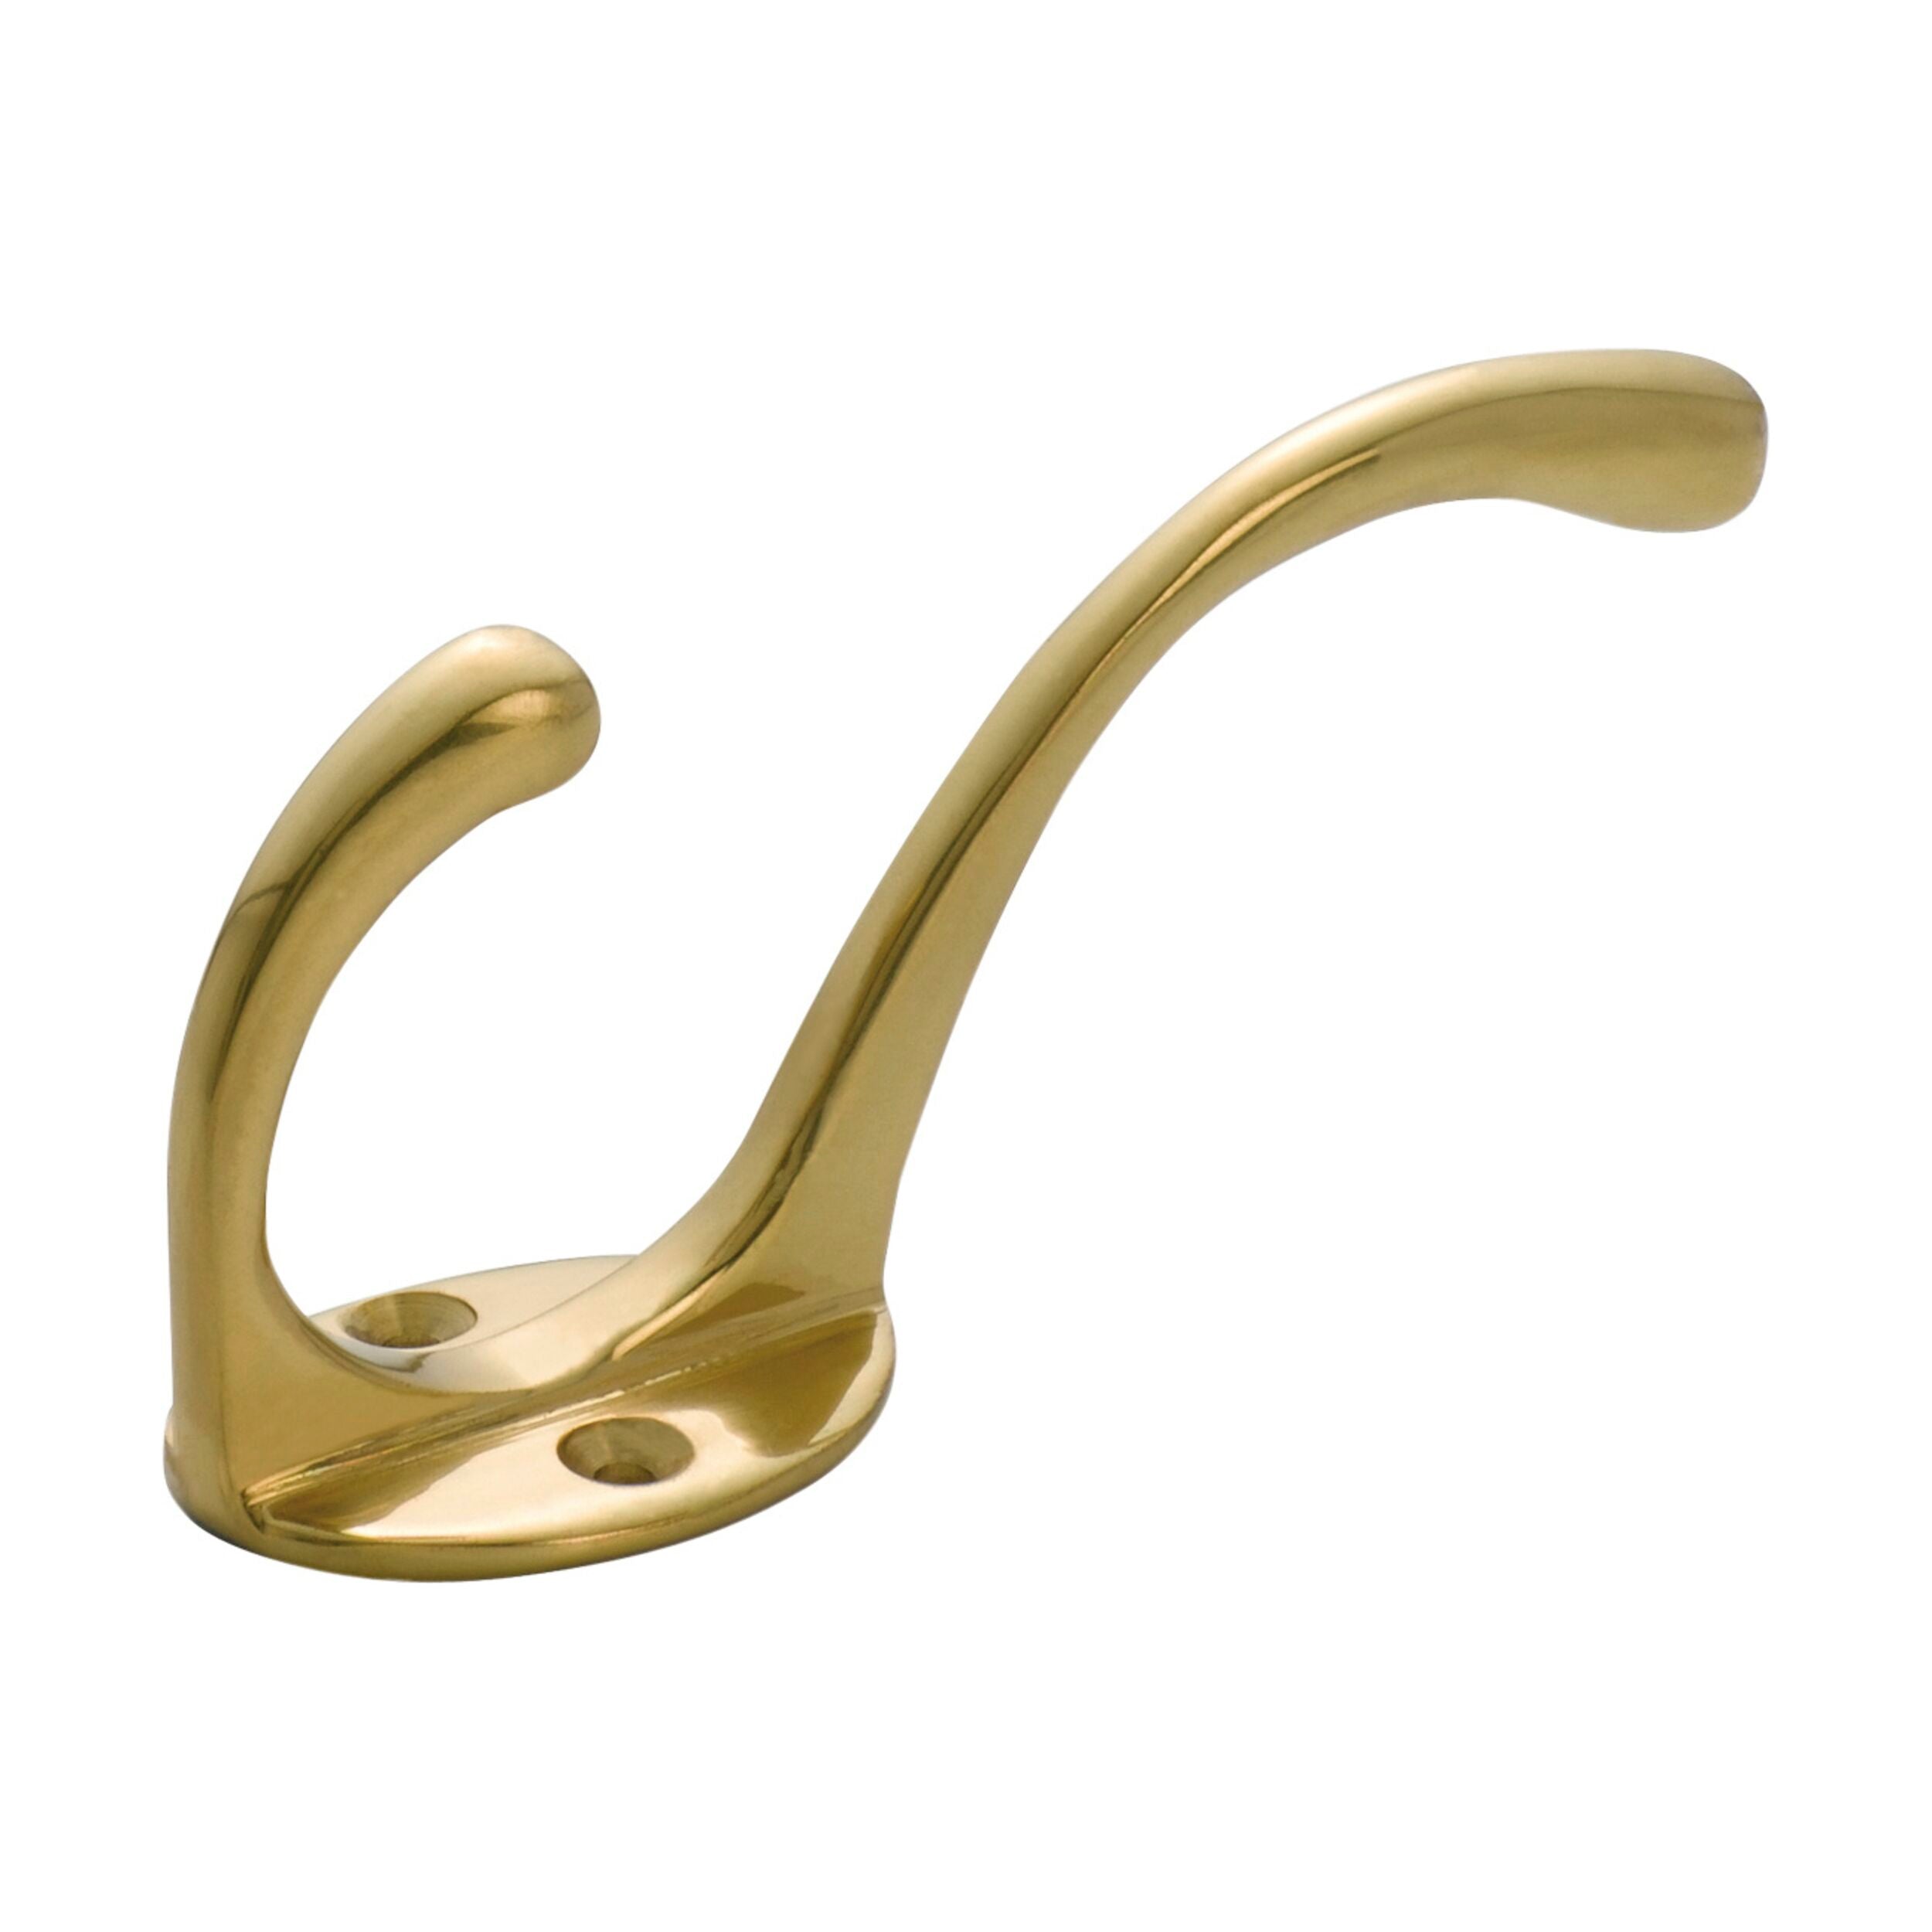 3921 Hat & Coat Hook Victorian Polished Brass H110xP50mm – Early